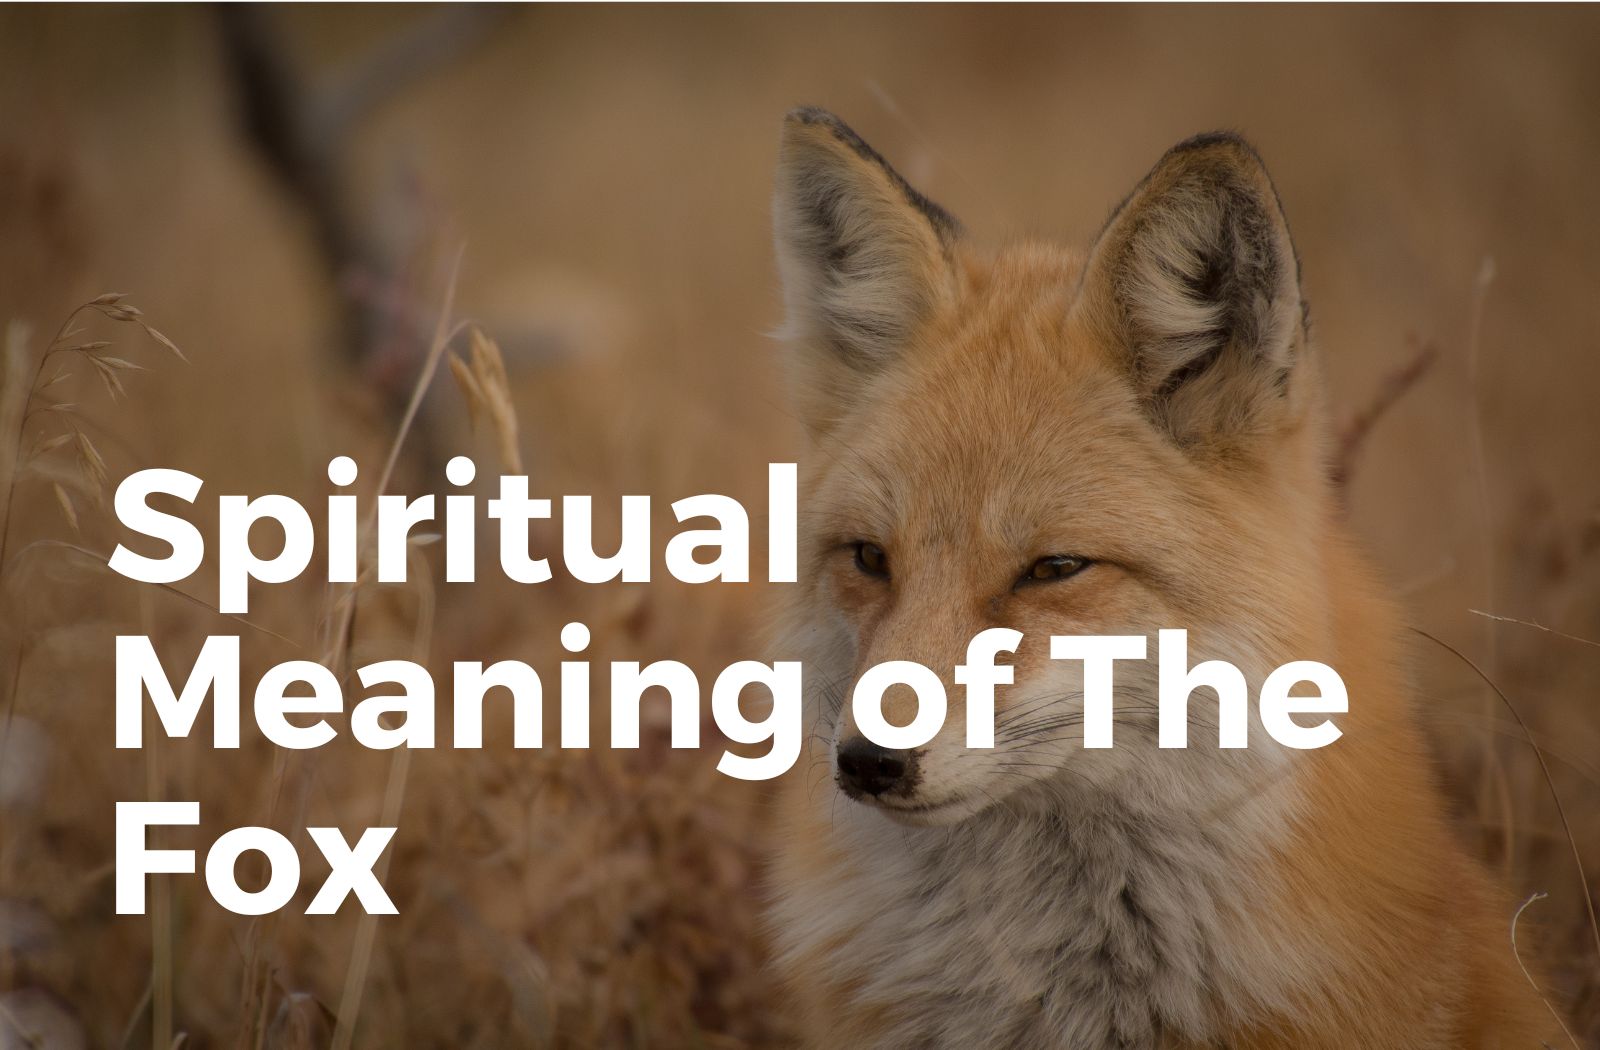 Spiritual meaning of the fox